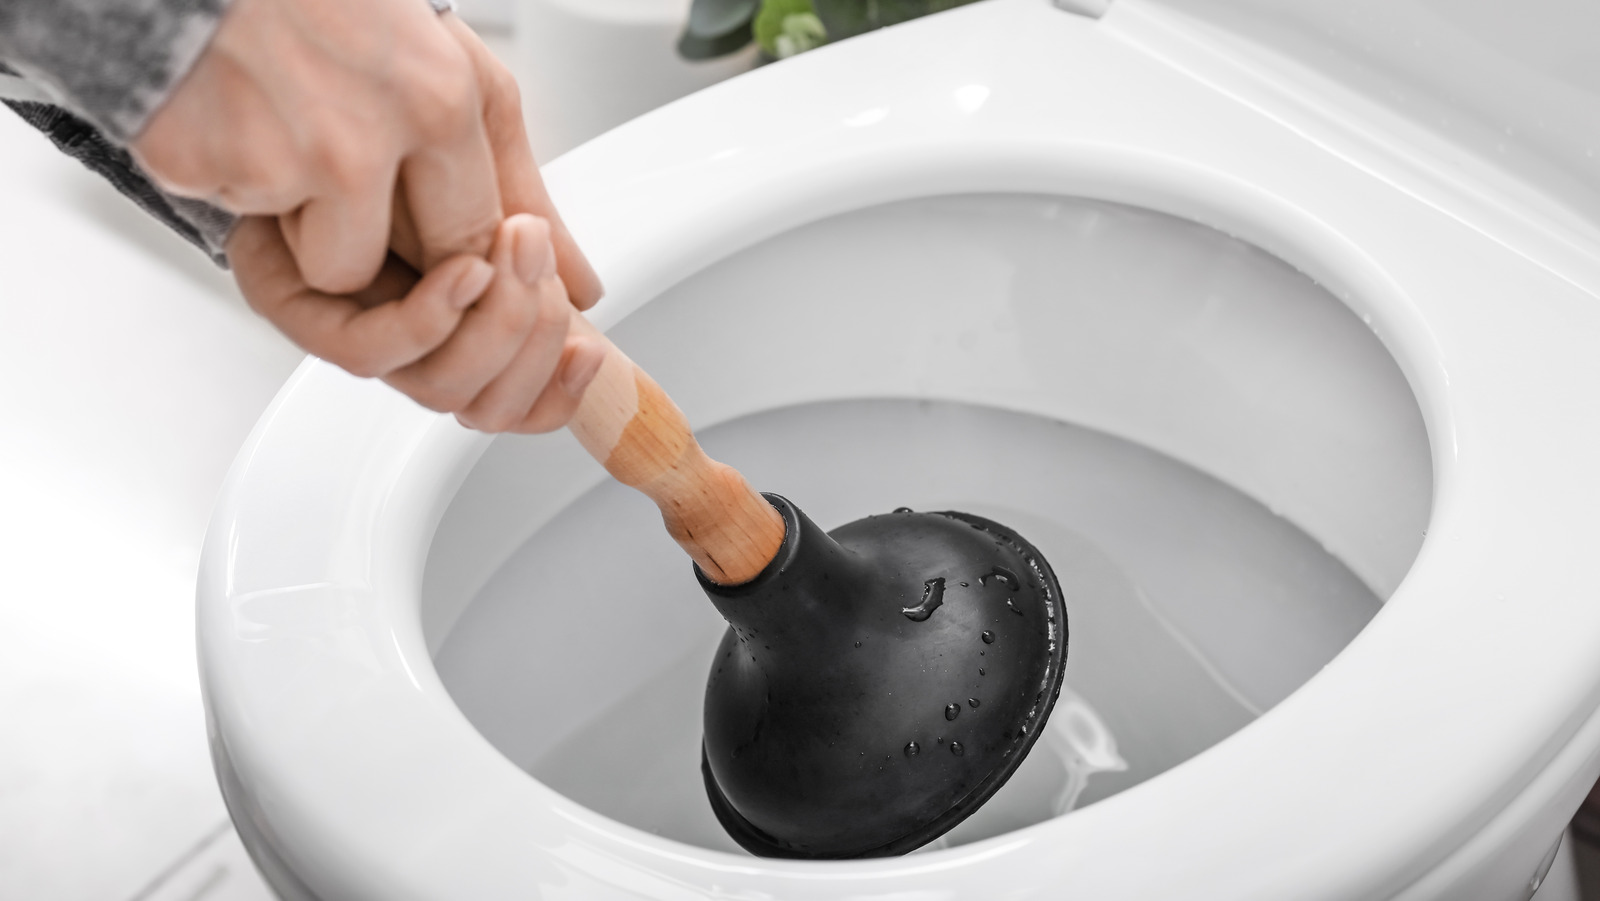 https://www.housedigest.com/img/gallery/how-often-do-you-need-a-new-plunger/l-intro-1691173093.jpg